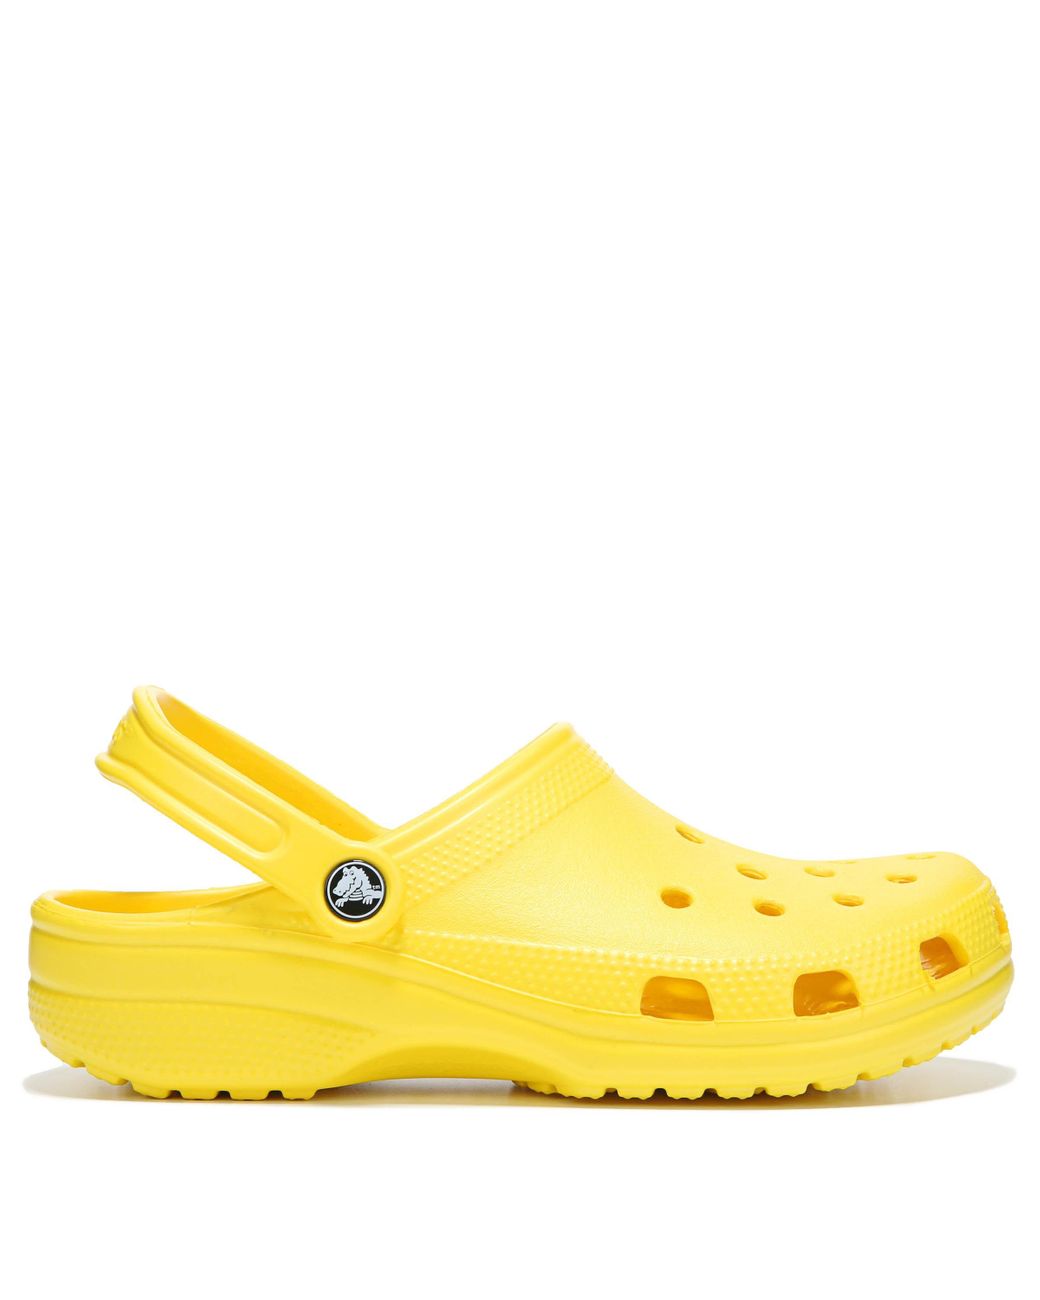 Crocs™ Classic Clog Shoes in Yellow - Lyst